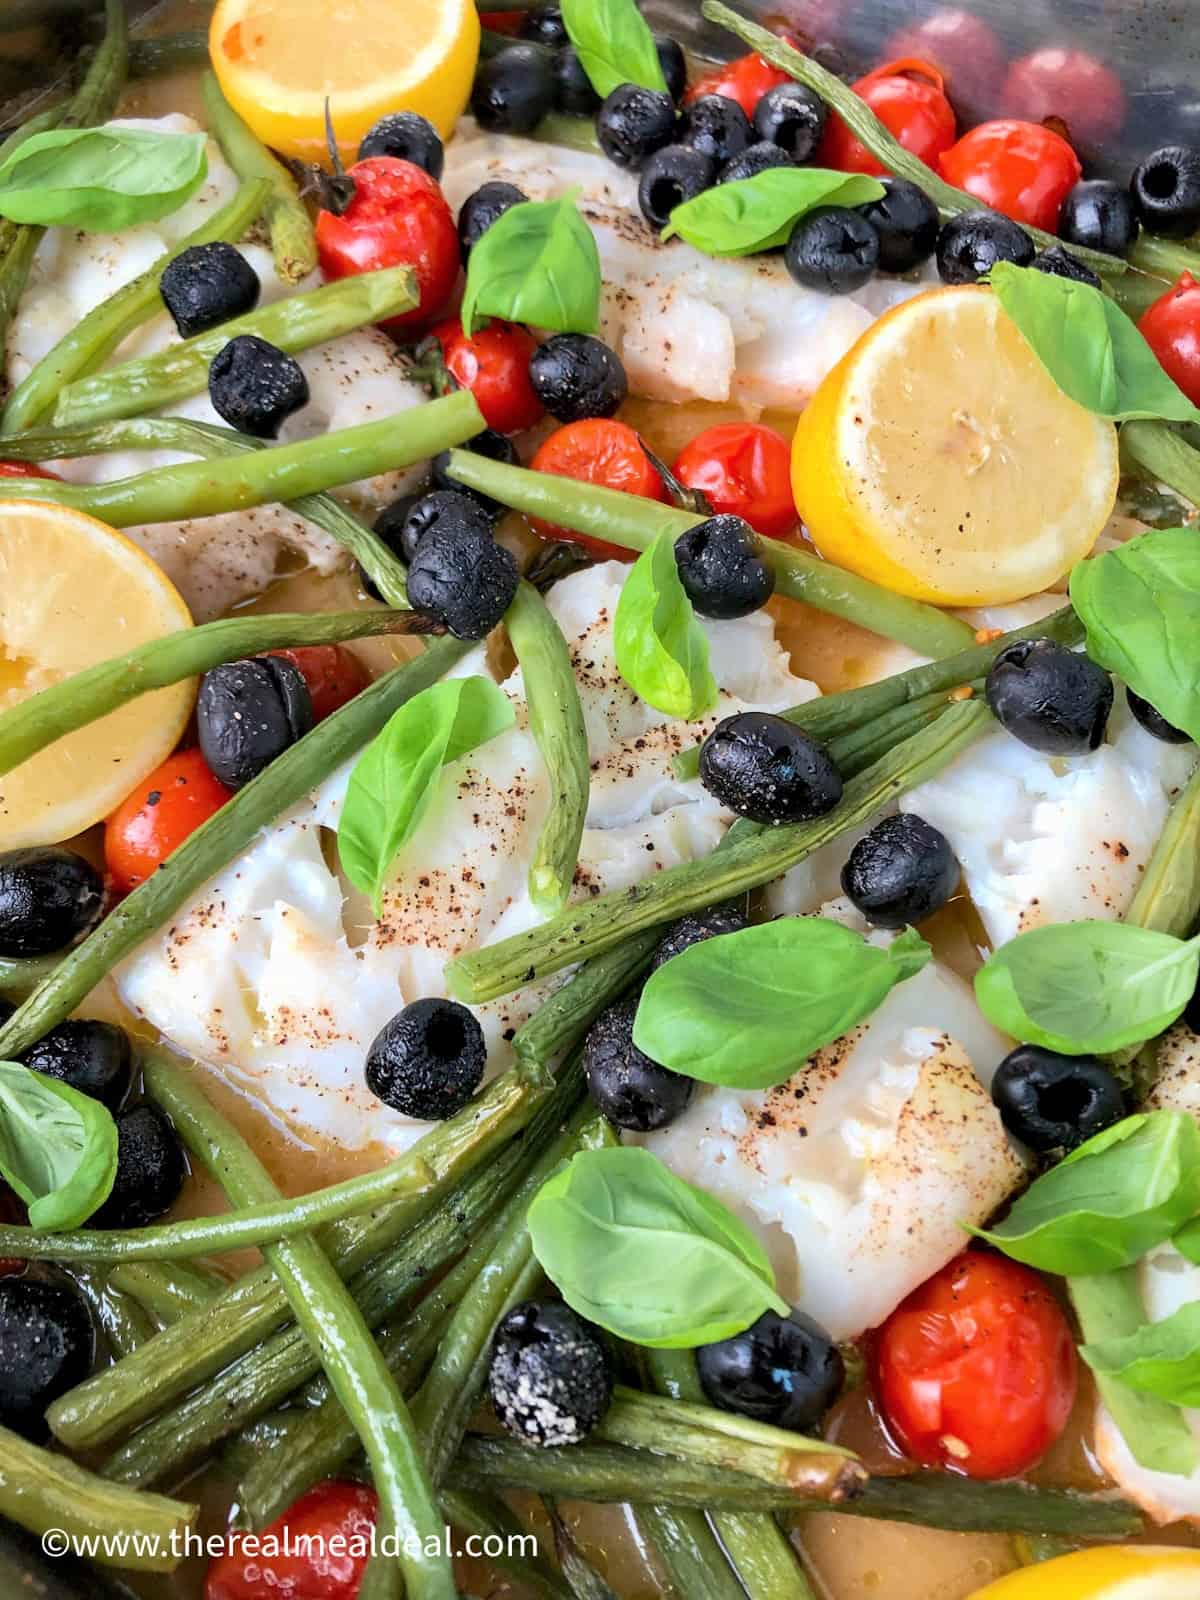 baked cod black olives green beans cherry tomatoes lemon halves and basil leaves in tray